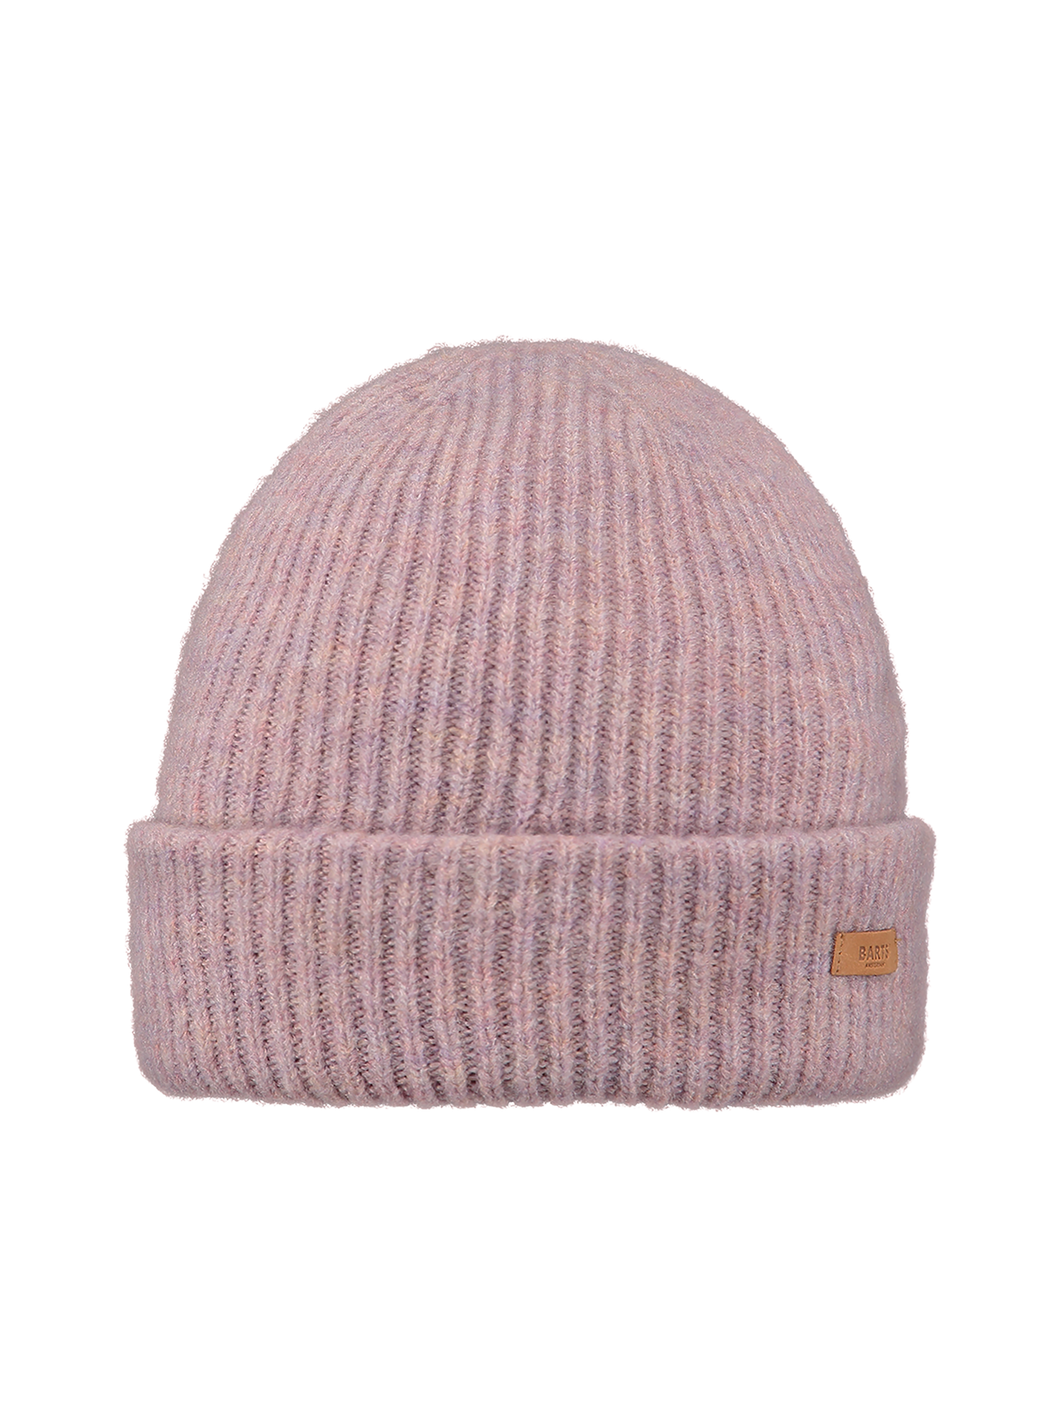 Witzia Beanie - Orchid | One size